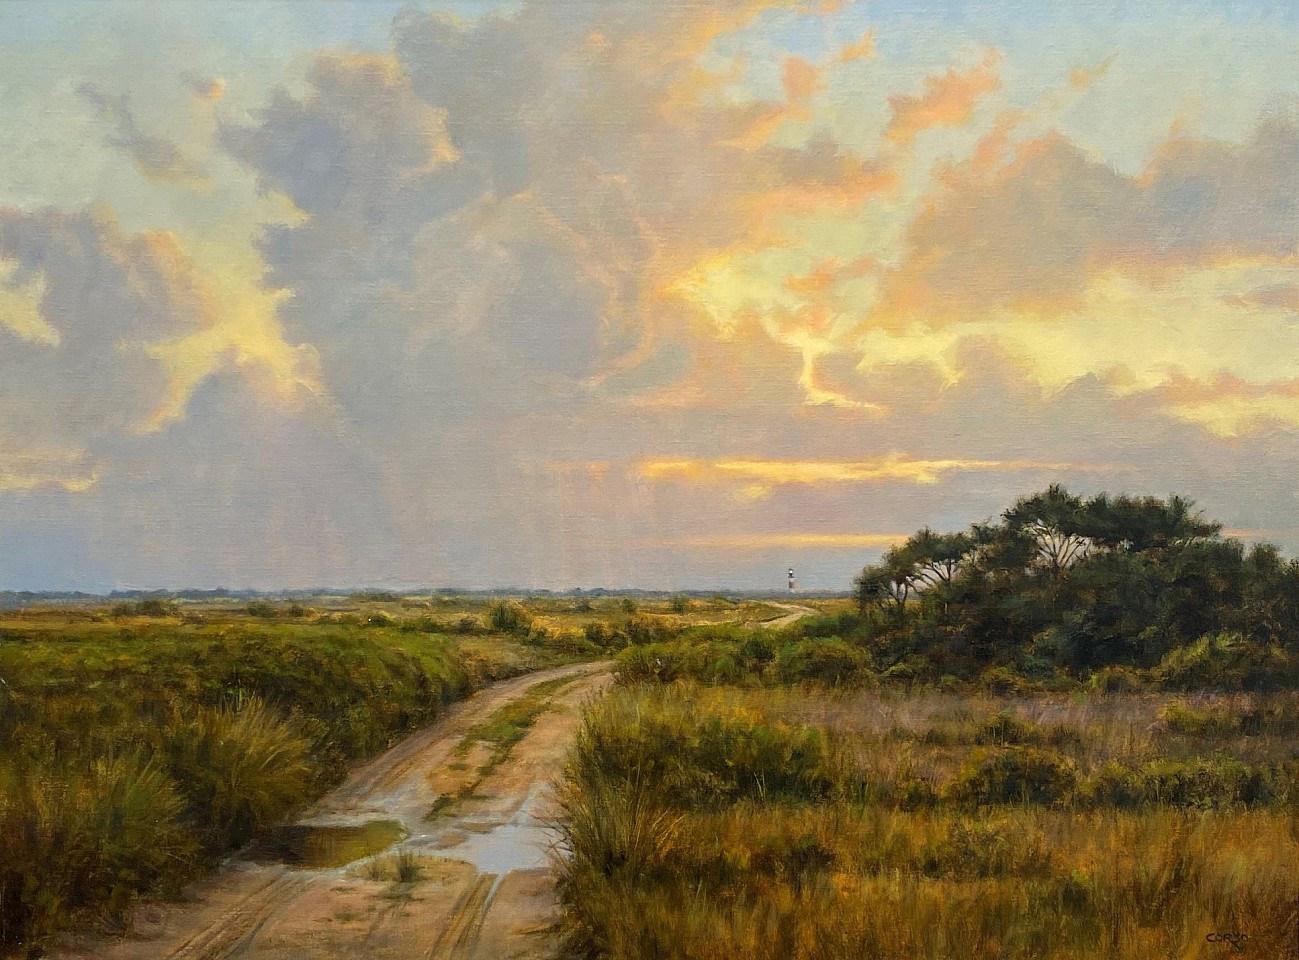 Frank Corso, After the Storm, 2021
oil on canvas, 30 x 40 in. (76.2 x 101.6 cm)
FC210601